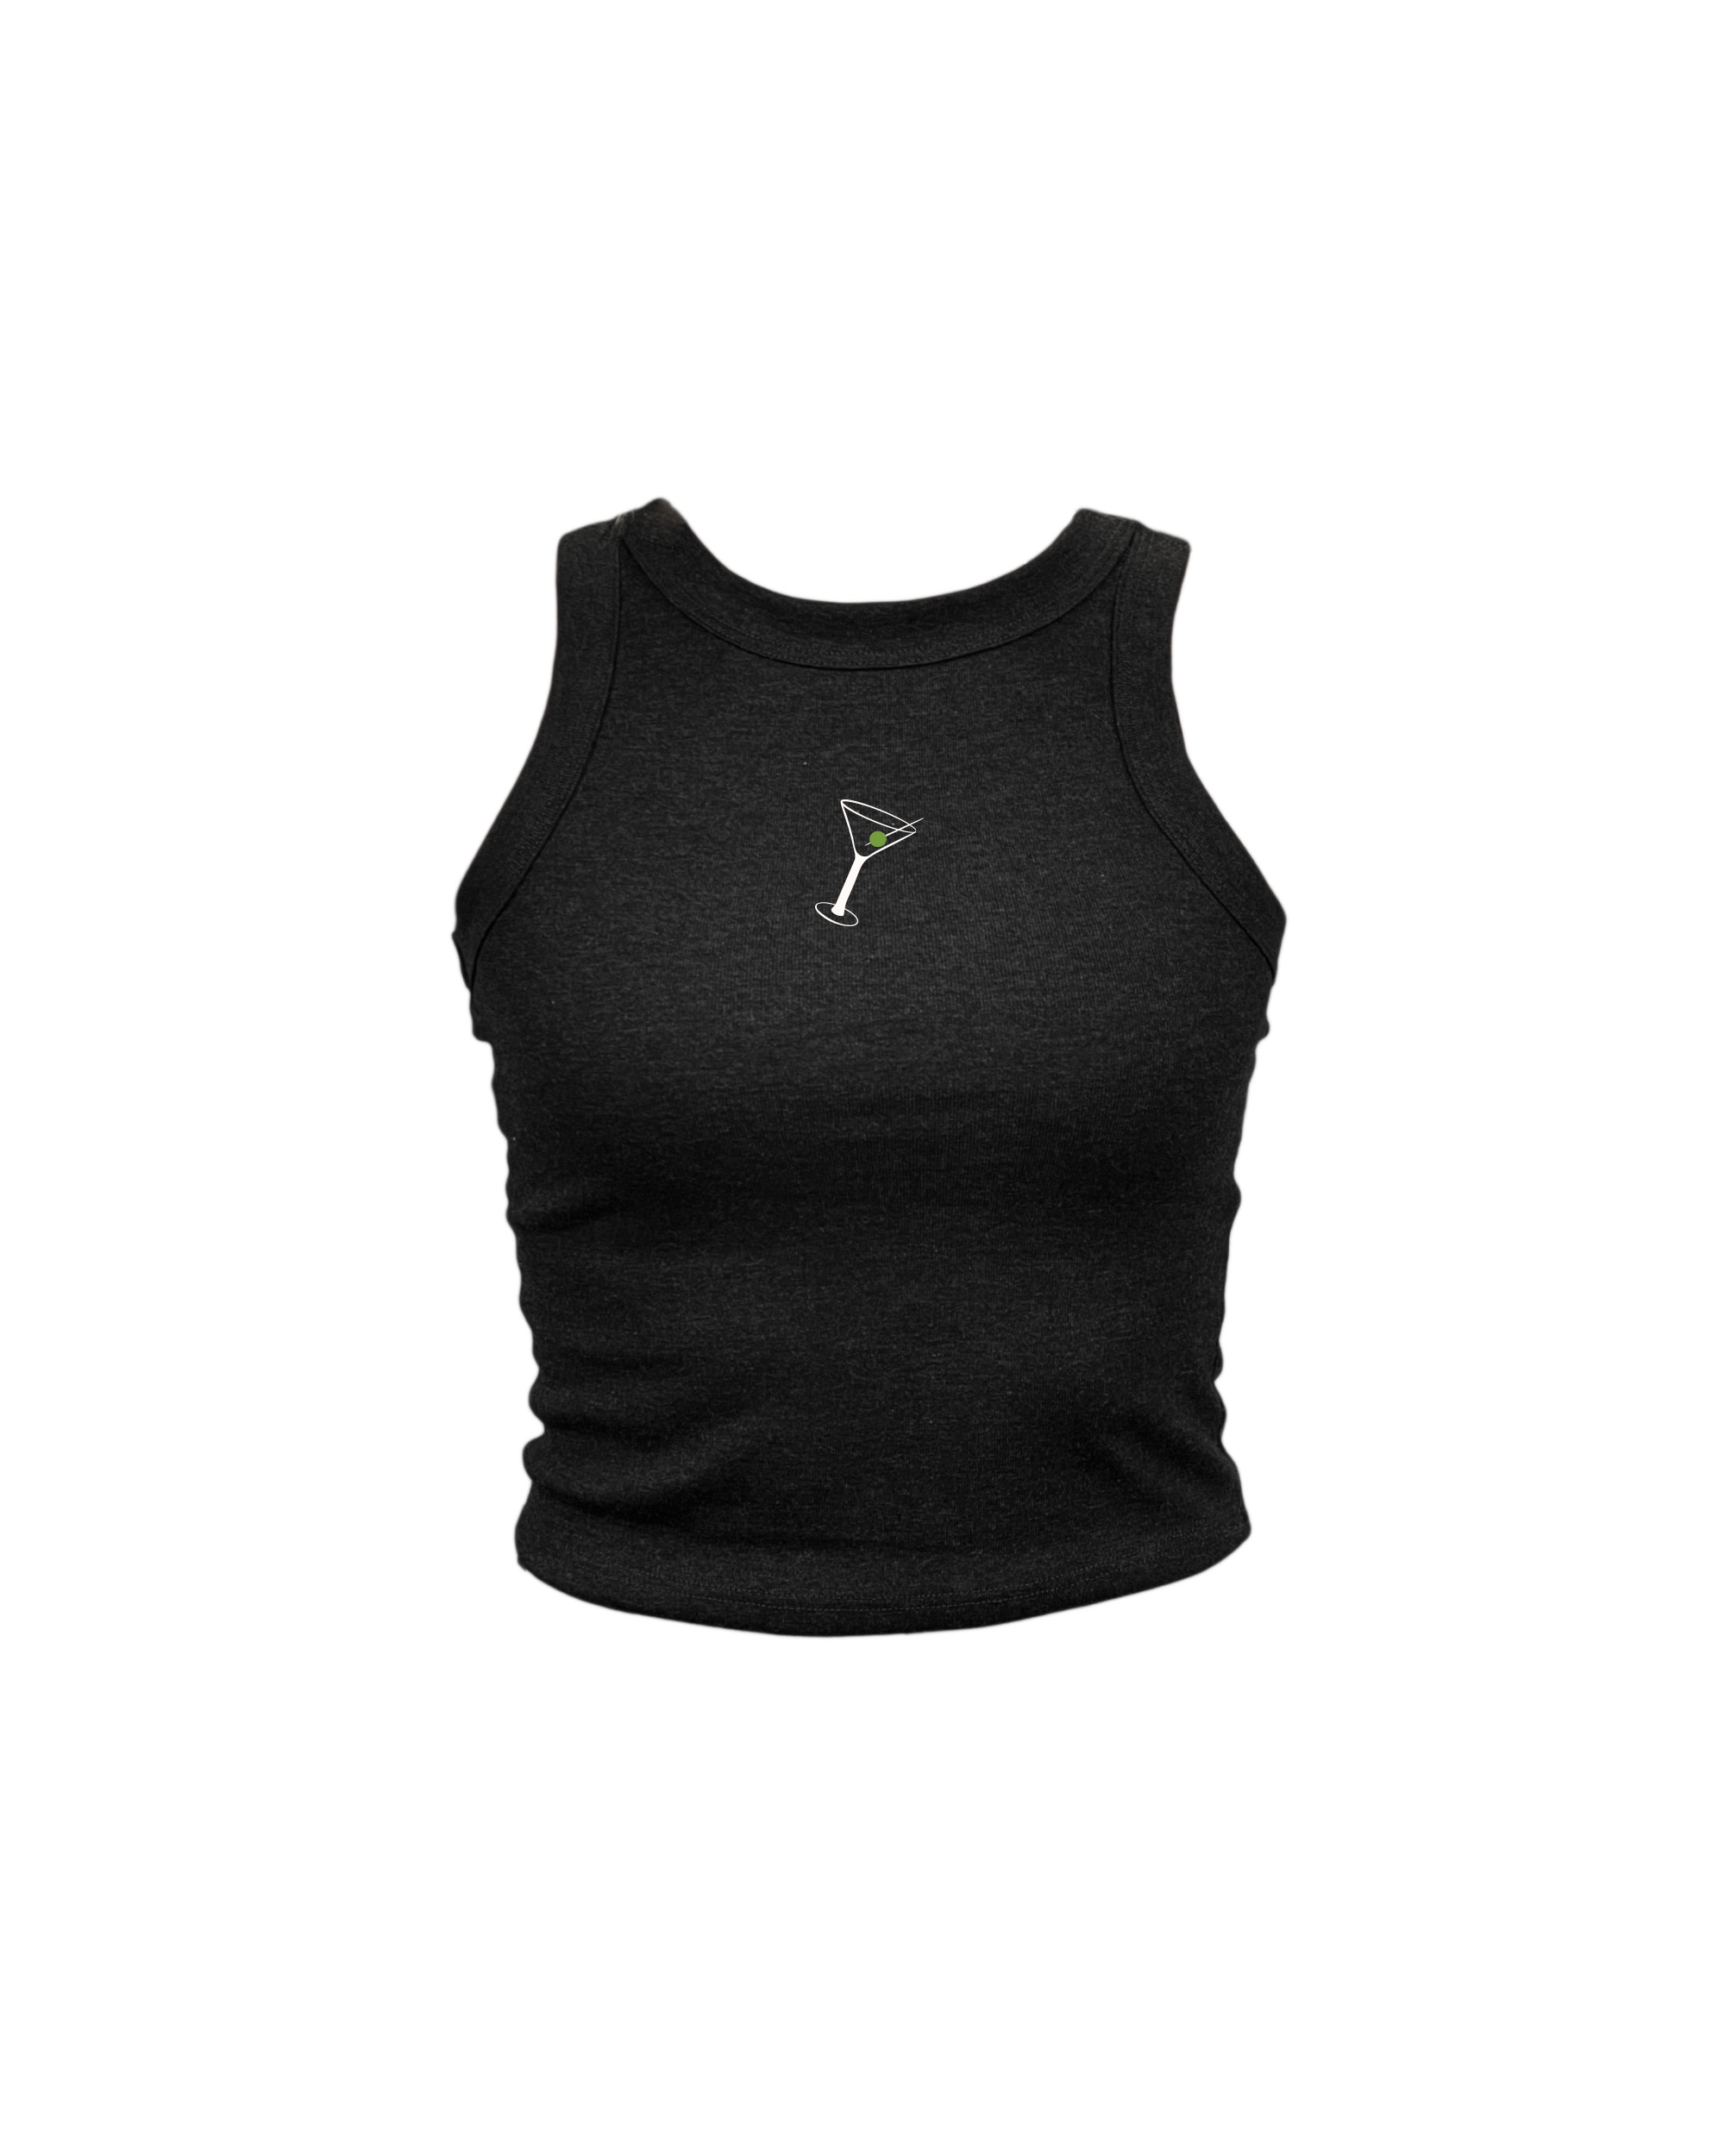 Dirty Martini Embroidered Black High Neck Tank